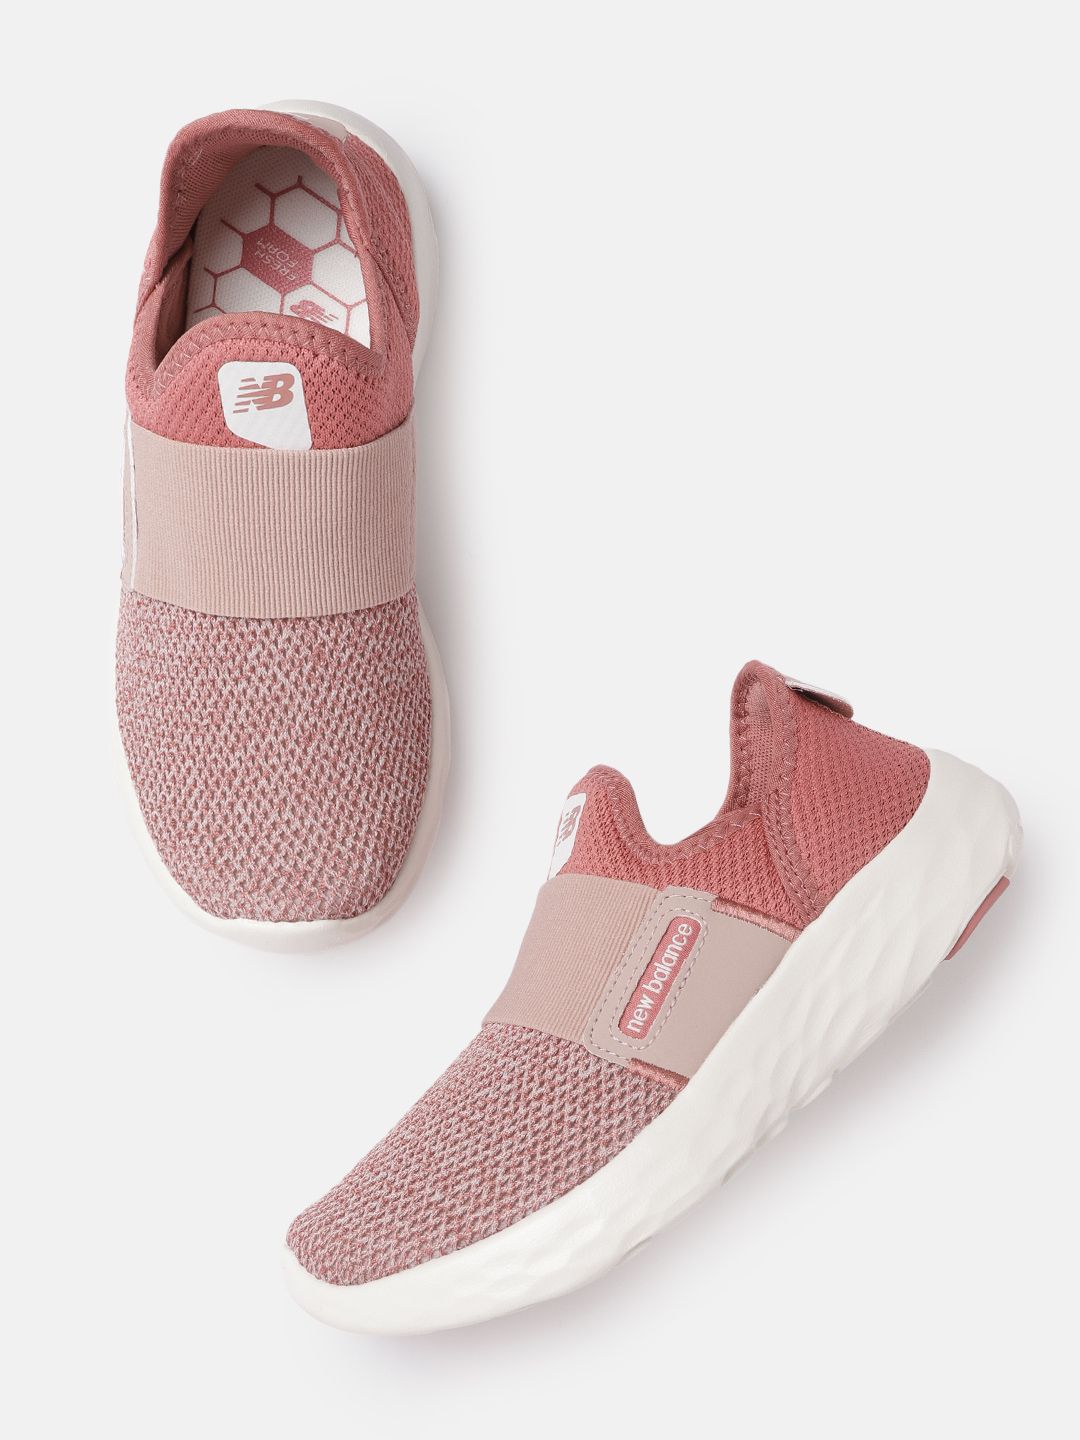 New Balance Women Dusty Pink & White Woven Design Slip-On Running Shoes Price in India